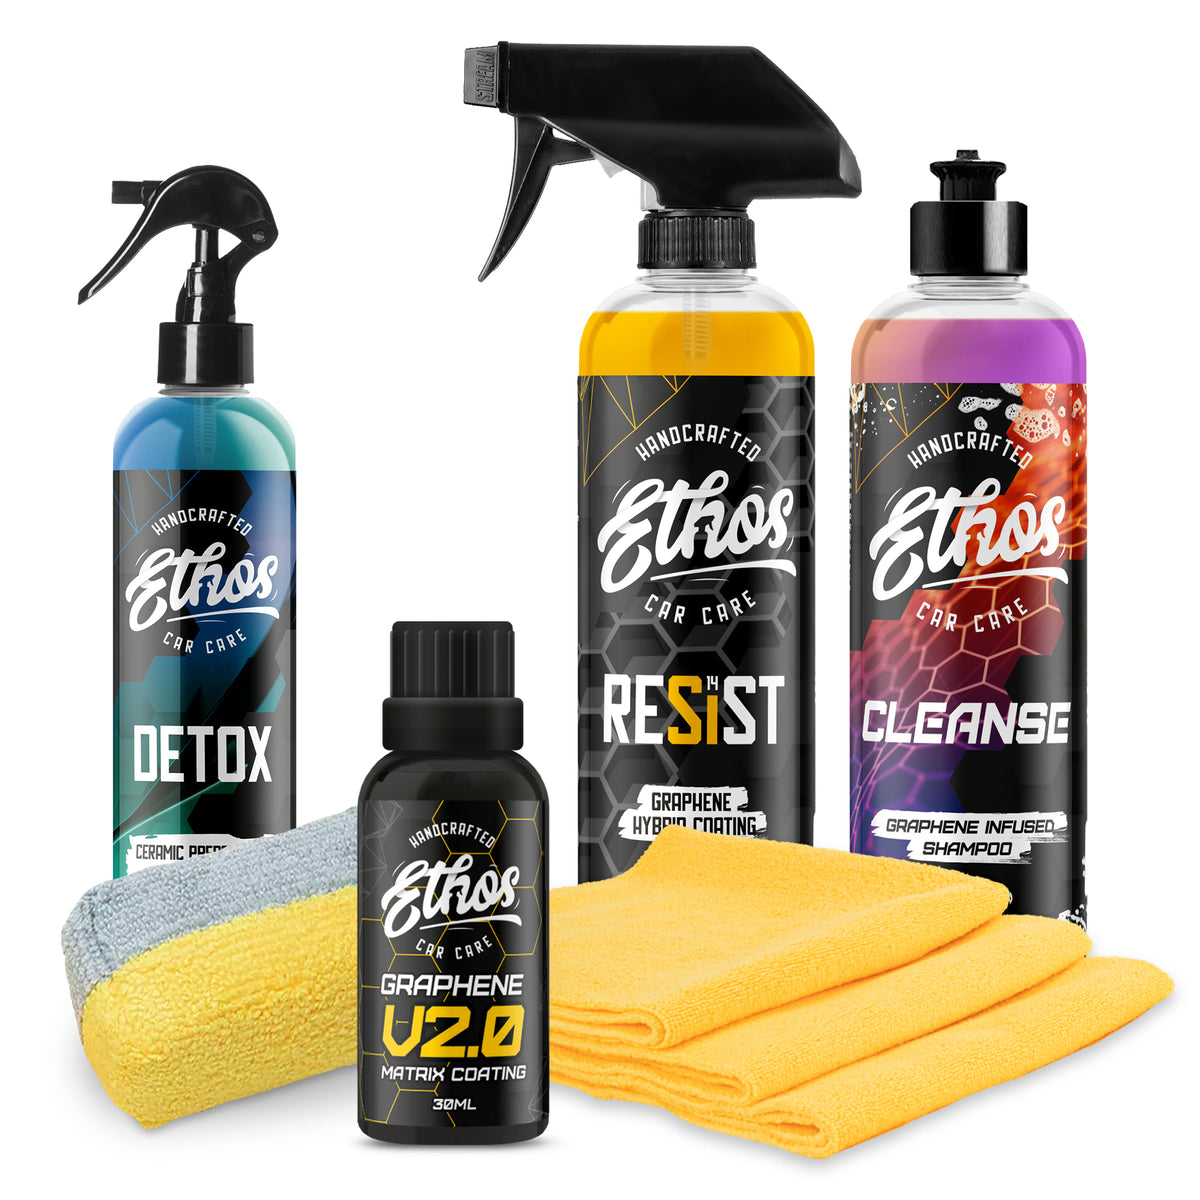 New, Best Selling Detailing & Car Care Products